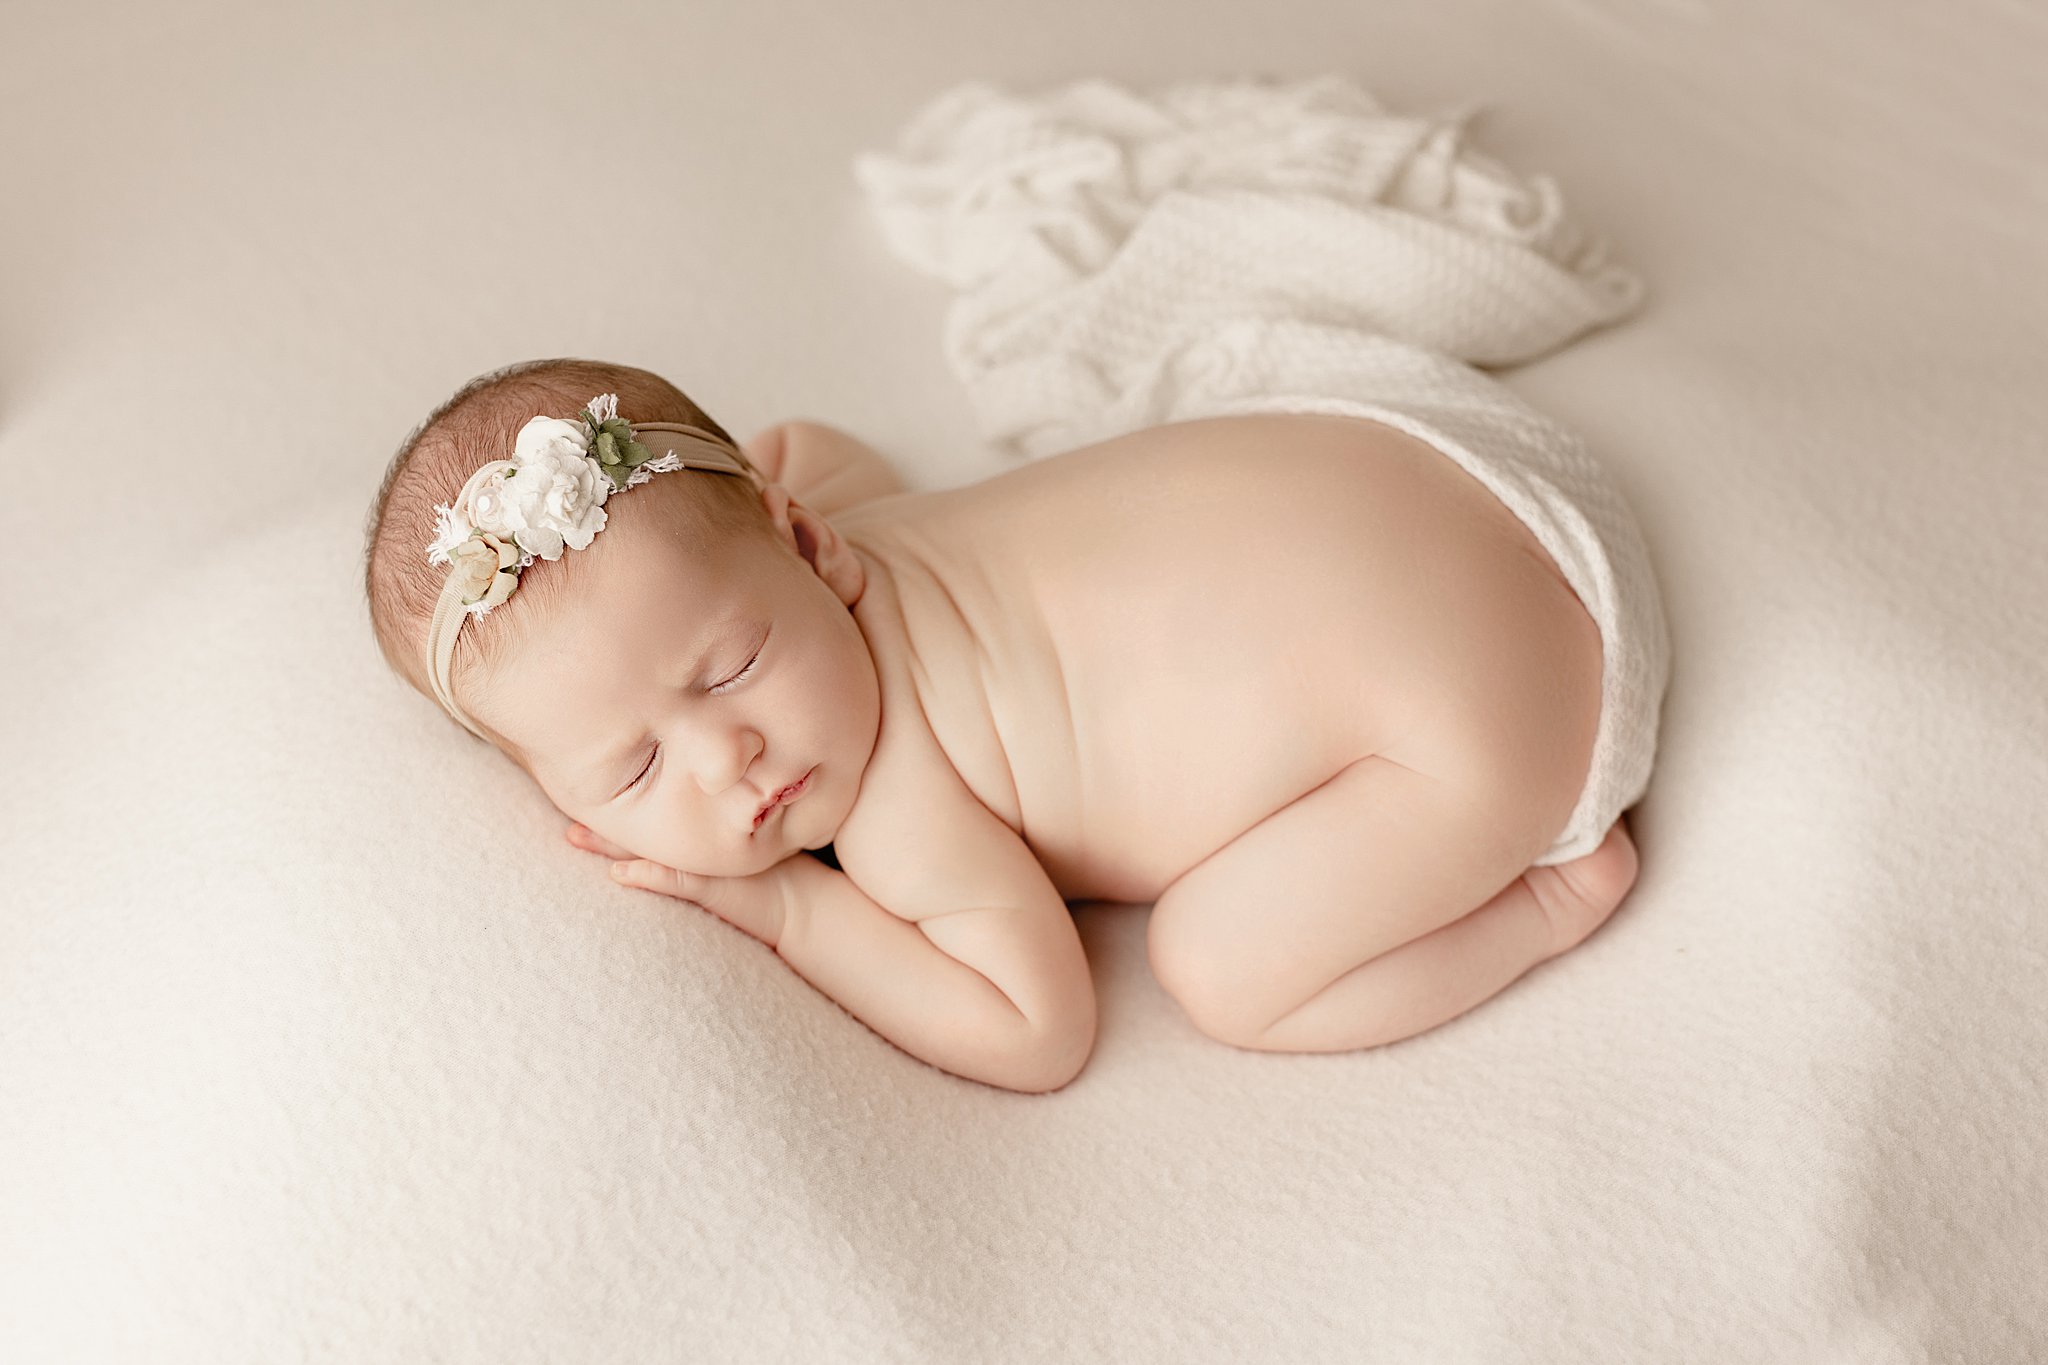 newborn baby laying on a cream blanket with a floral headband